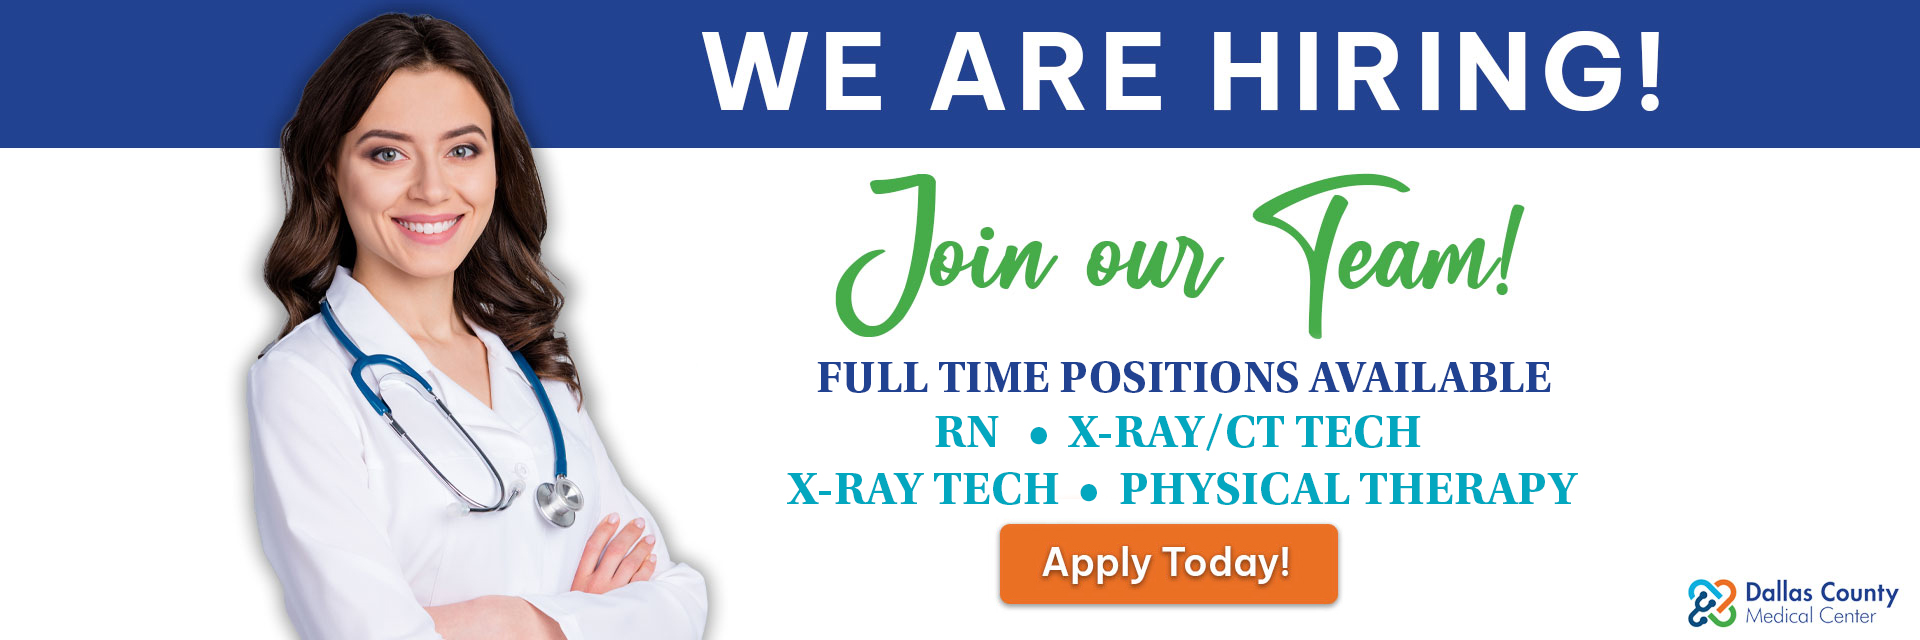 WE ARE HIRING!

Join Our Team!
LPN . Medical Records/HIM . Receptionist X-Ray Tech . X-Ray/CT